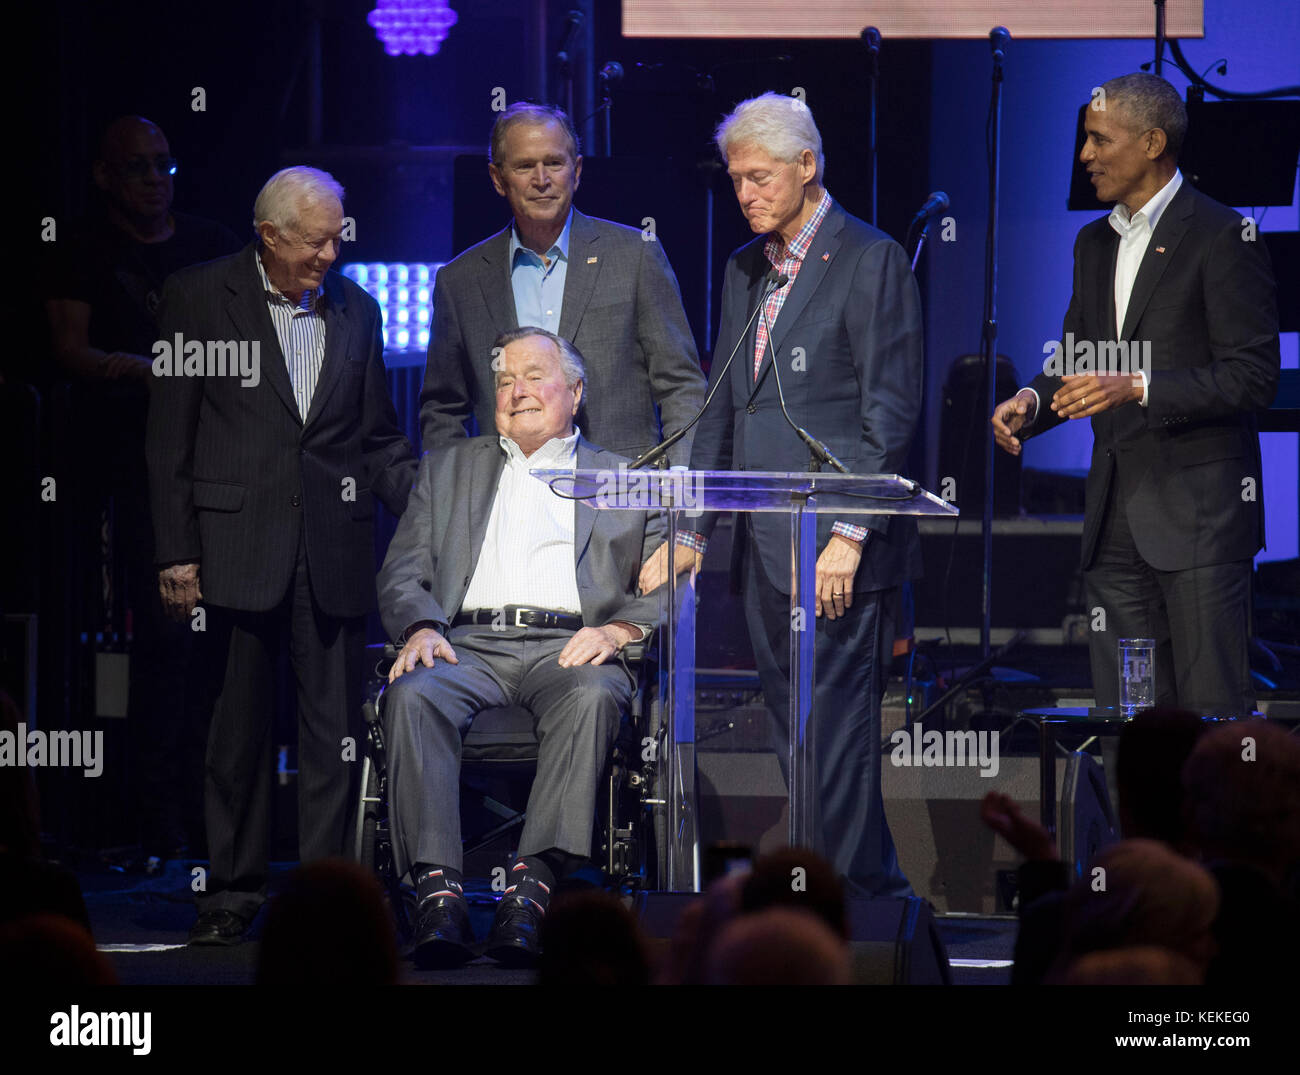 College Station, Texas USA Oct. 21, 2017: The five living former U.S. Presidents onstage at Texas A&M University's Reed Arena for a One America Response concert and fund raiser for hurricane and storm relief. Left to right, former presidents Jimmy Carter, George H.W. Bush, George W. Bush, Bill Clinton and Barack Obama appear midway in the concert. Credit: Bob Daemmrich/Alamy Live News Stock Photo